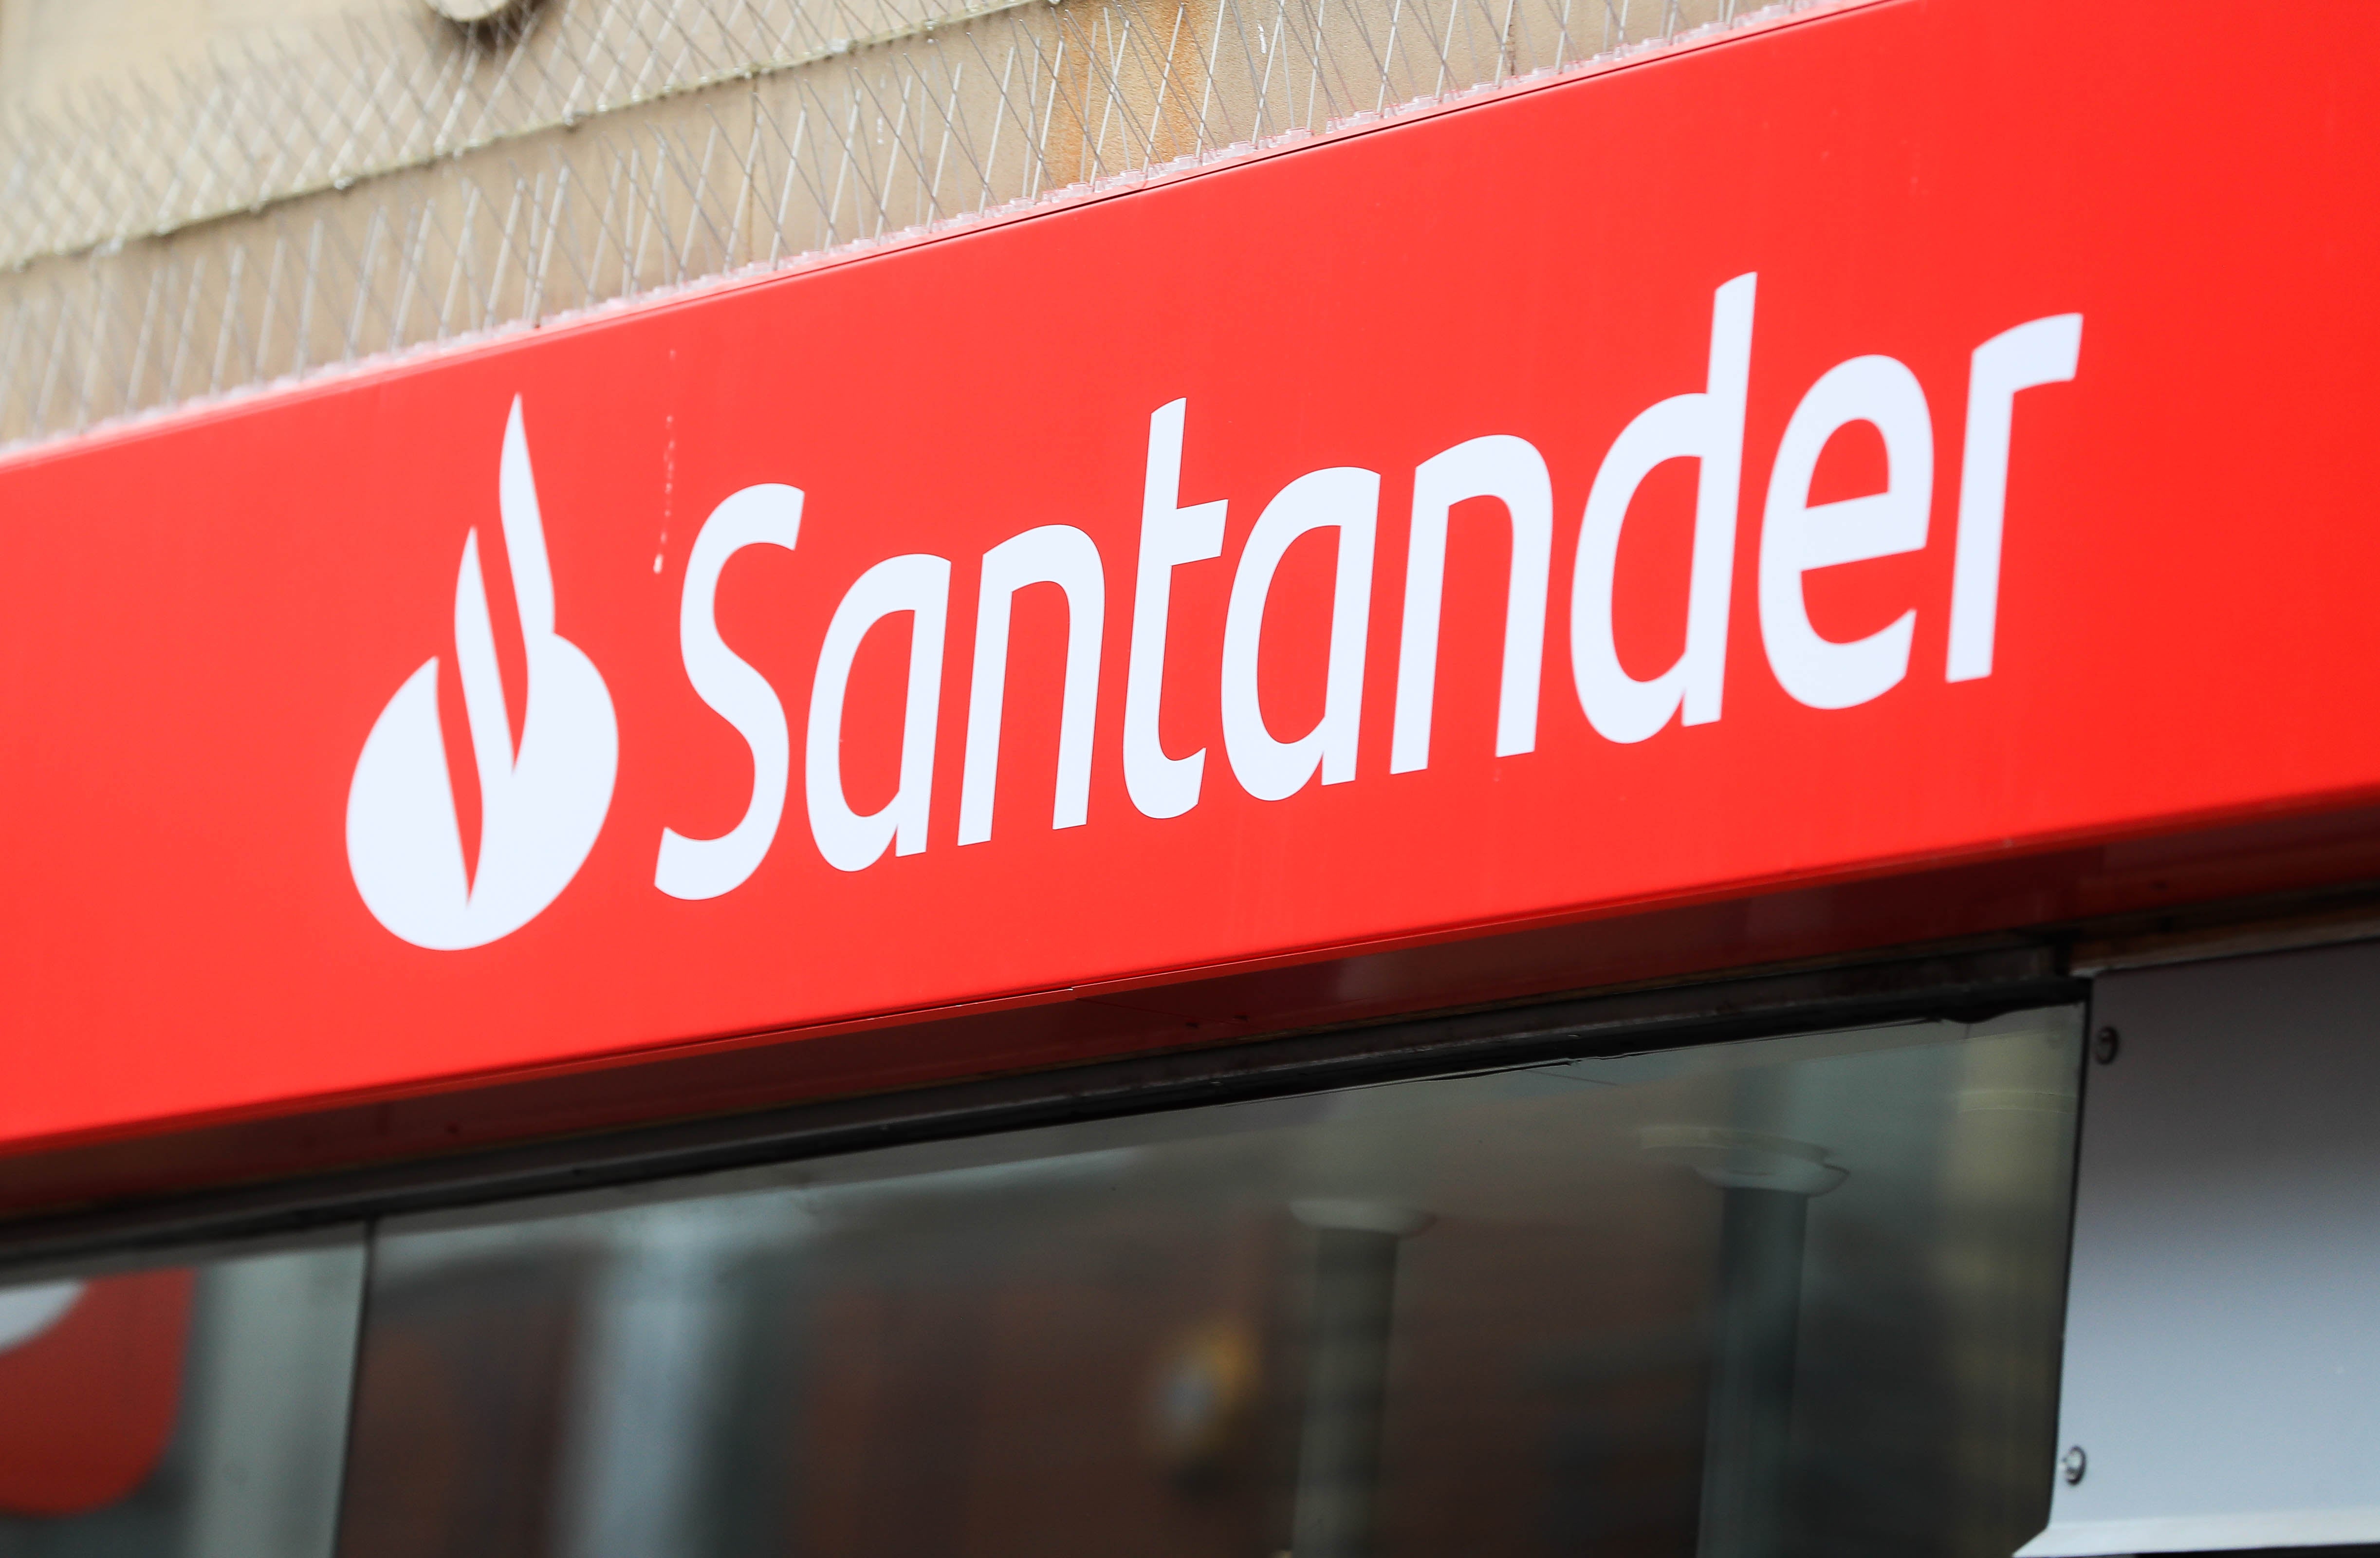 Santander has become the latest to reveal “pingdemic” disruption as the bank said it is having to close up to around 25 branches in its network due to staff shortages.